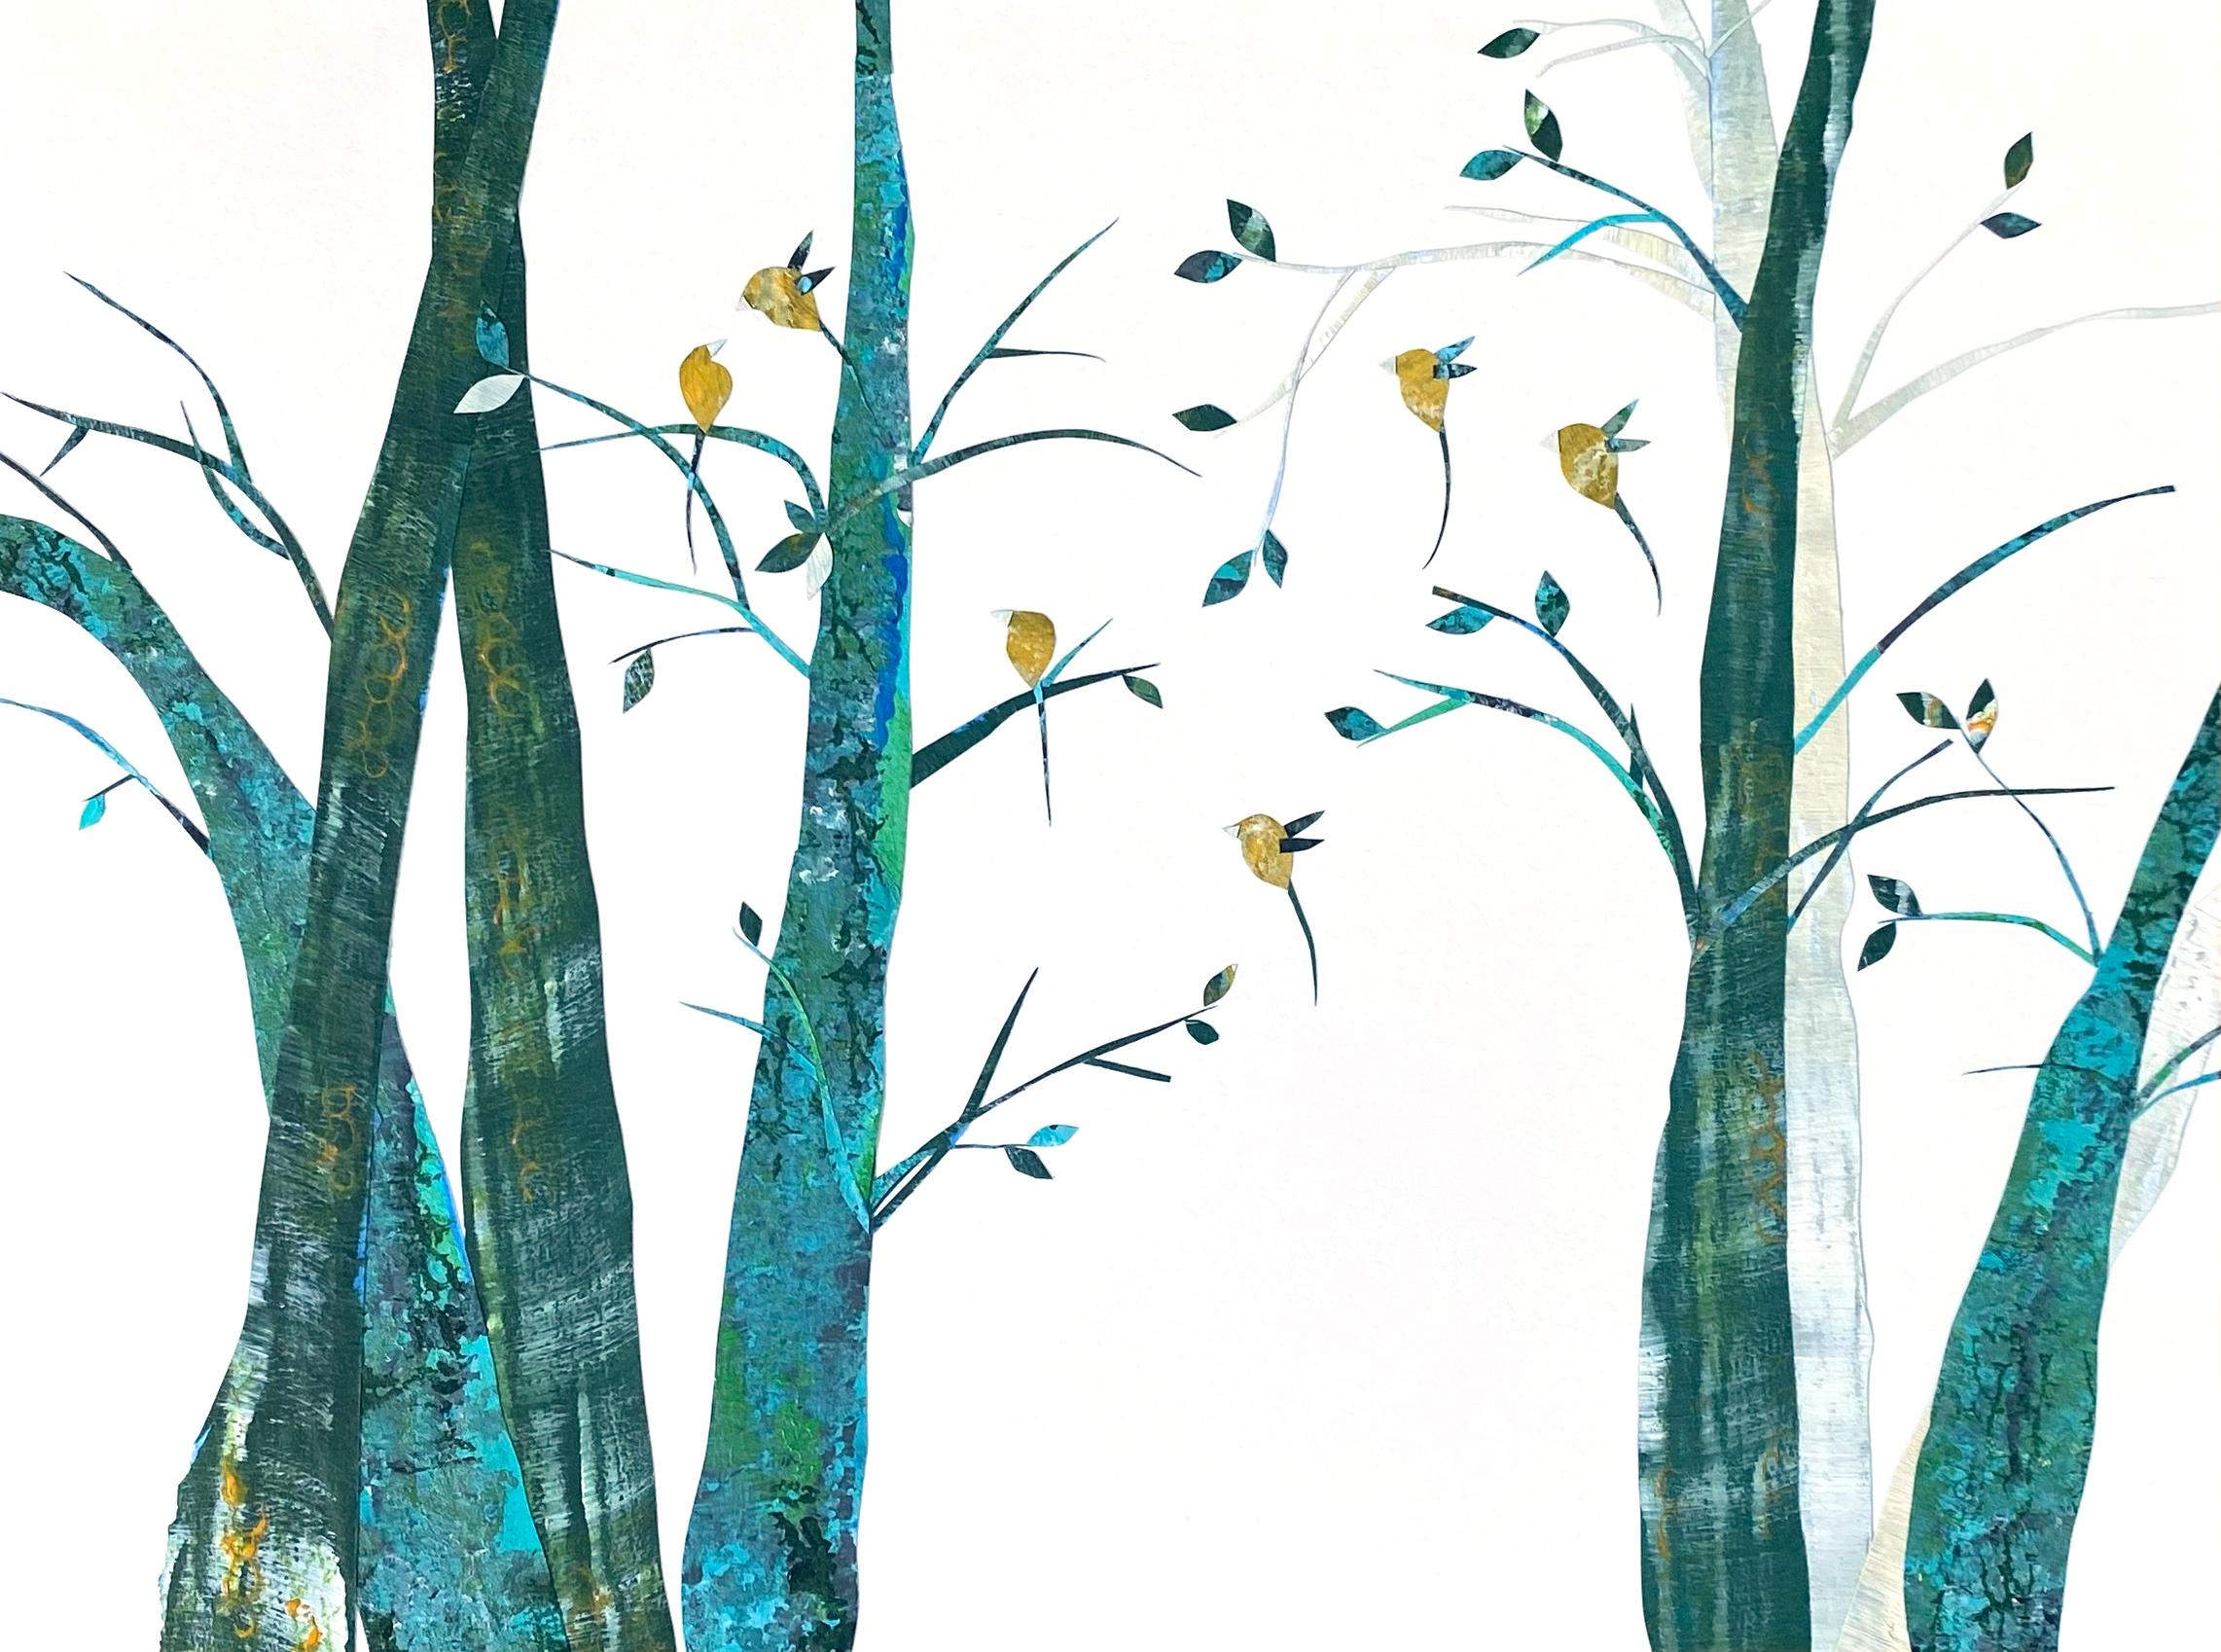 First Day of Spring I (Collage, Birds, Landscape, Trees, Teal, Blue) - Mixed Media Art by Aster da Fonseca